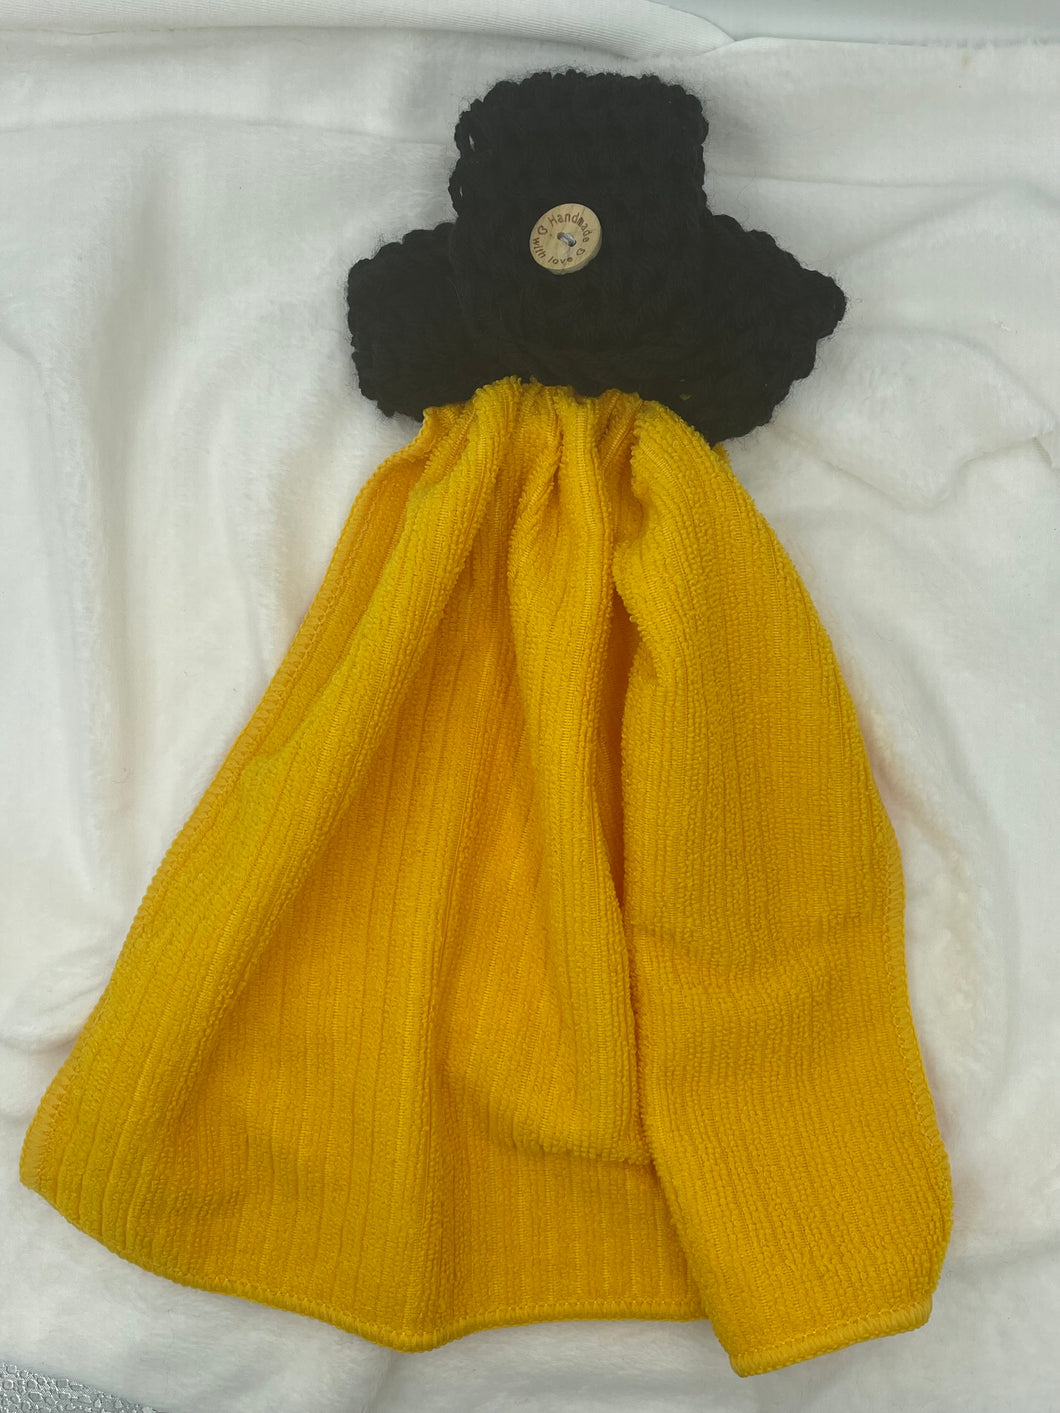 Yellow and Black Hanging Hand towel